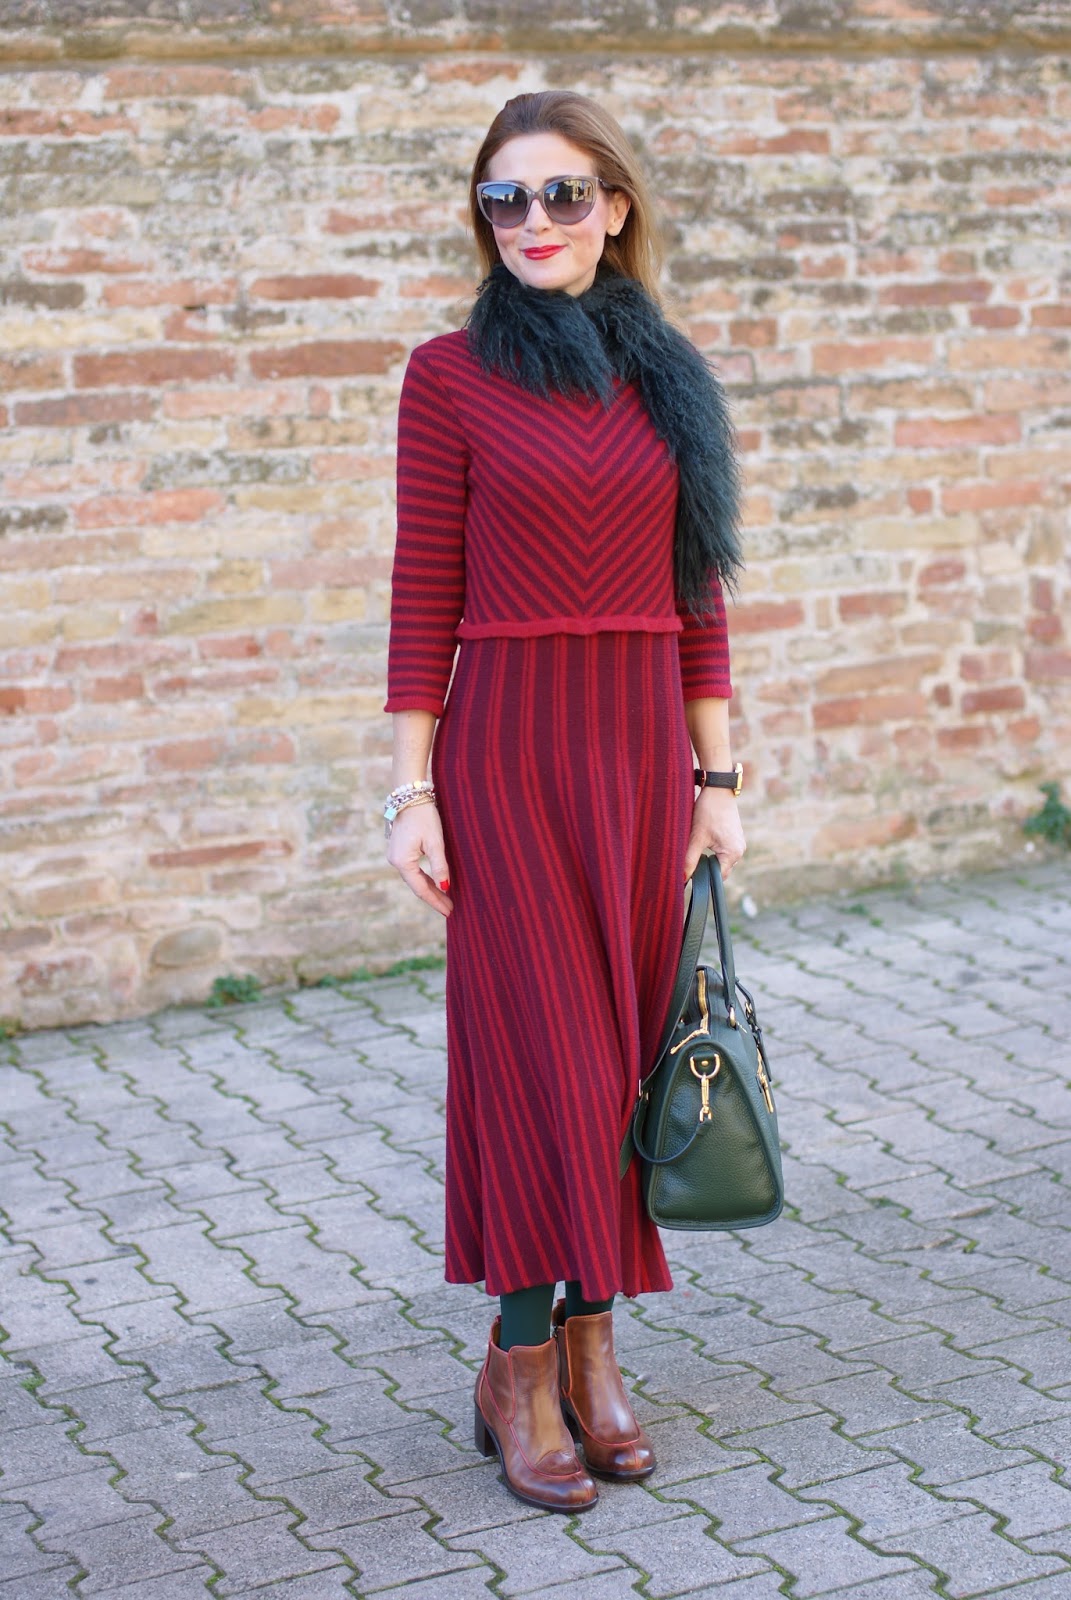 Made in Italy fashion: vintage style outfit | Fashion and Cookies ...